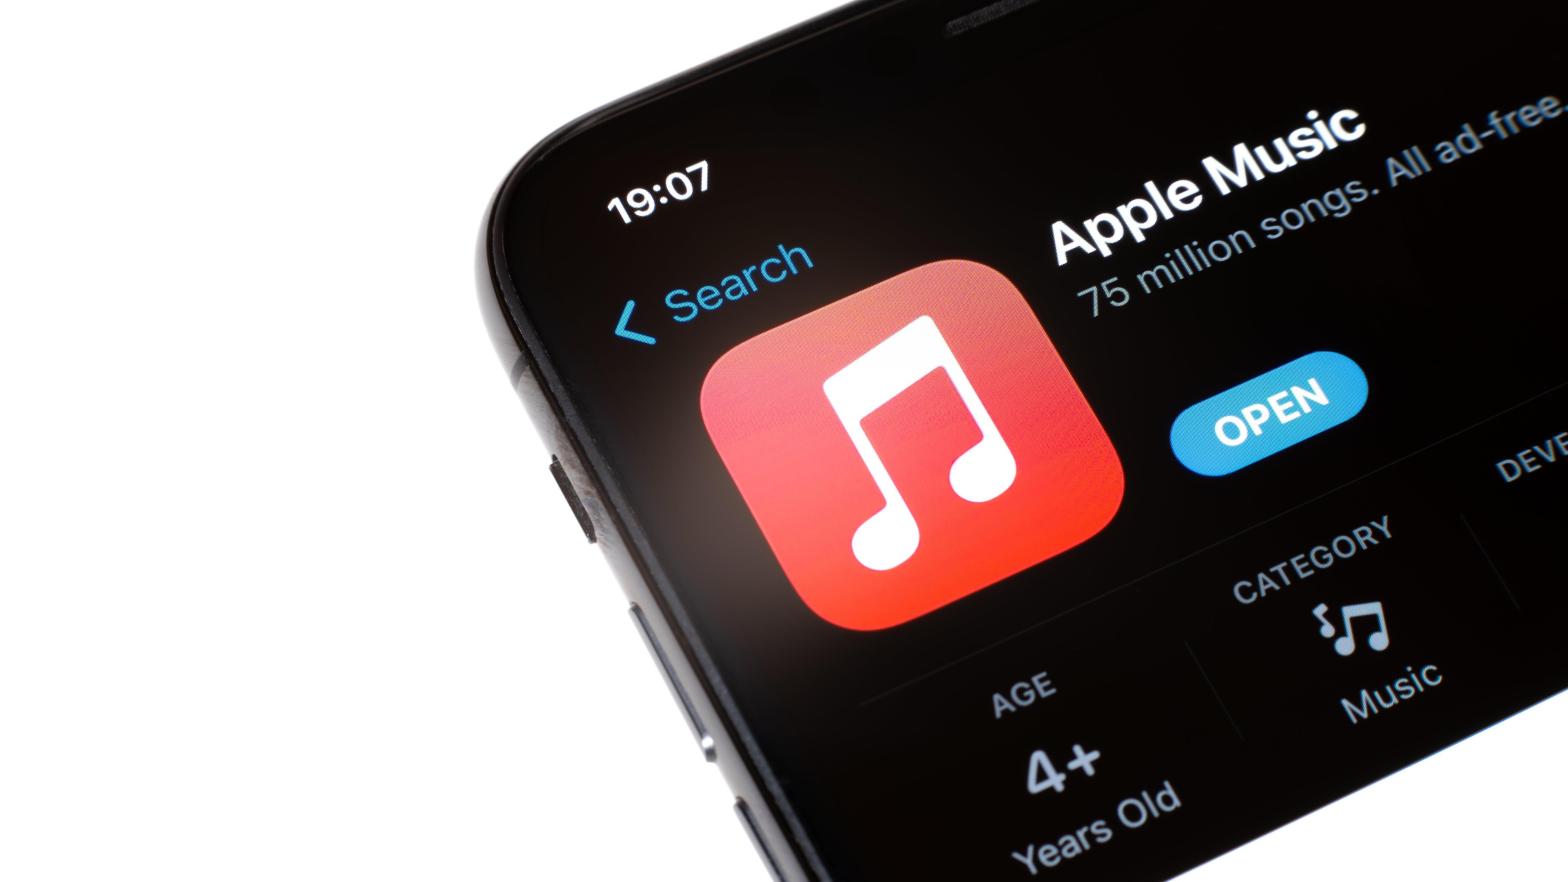 Users are reporting a concerning bug on Apple Music where their playlists are being modified without their consent. Others have reported finding unknown playlists showing up on their apps. (Photo: DVKi, Shutterstock)